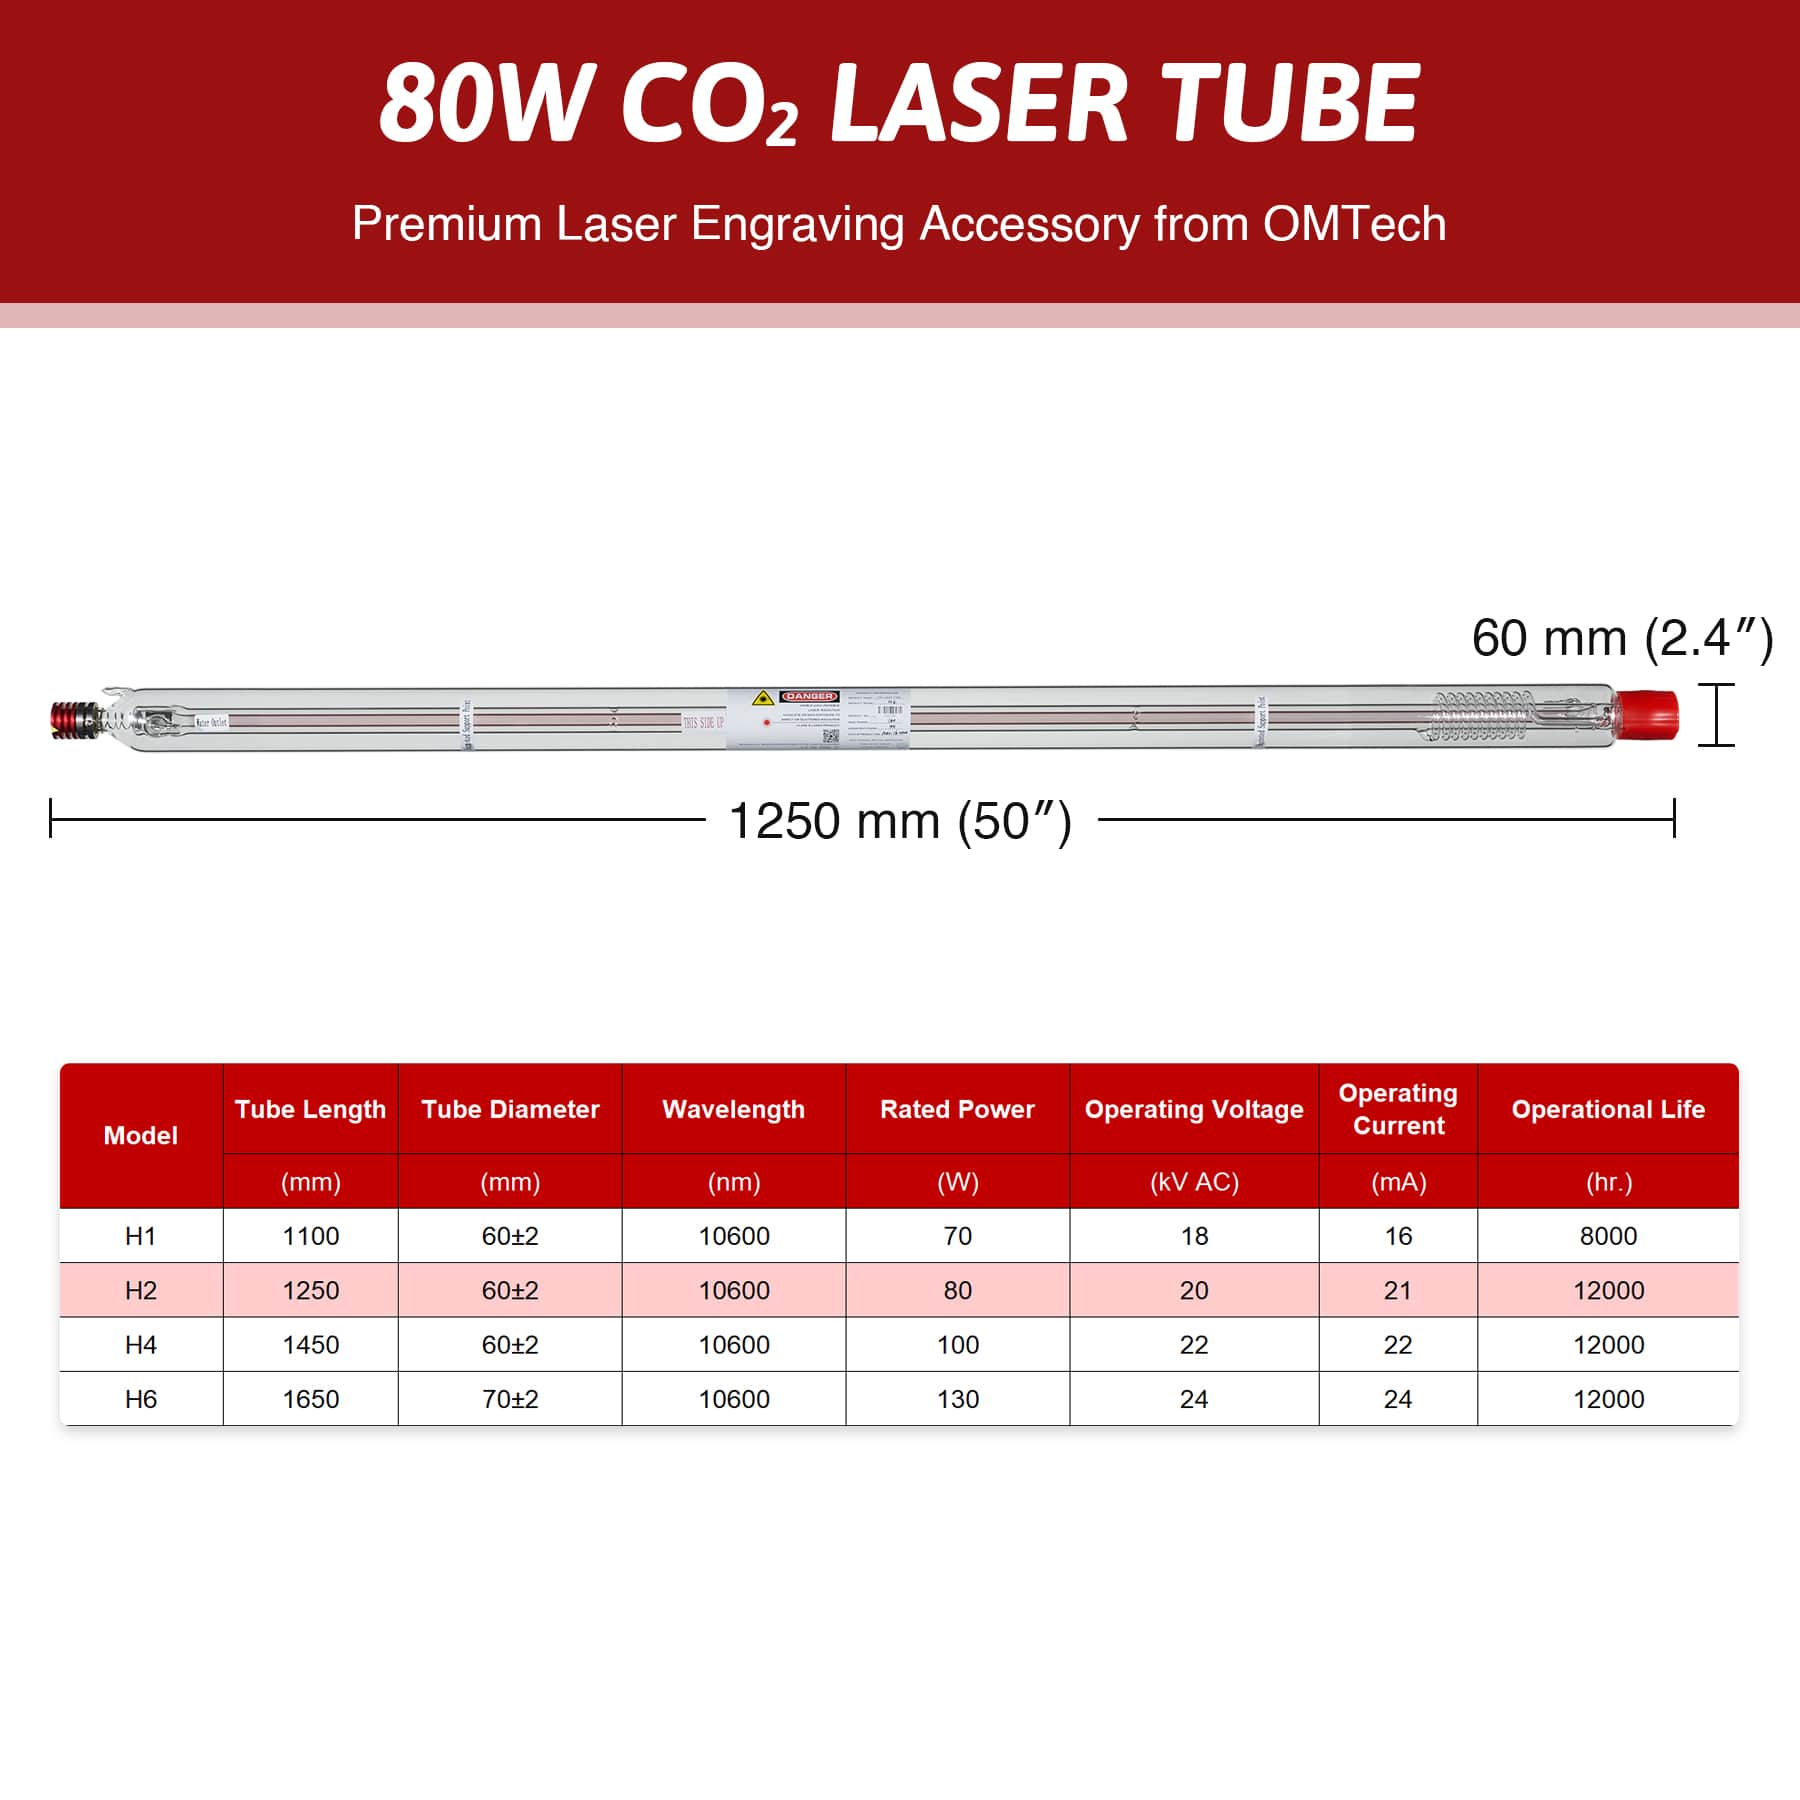 YL CO2 Laser Tube Replacement Specification